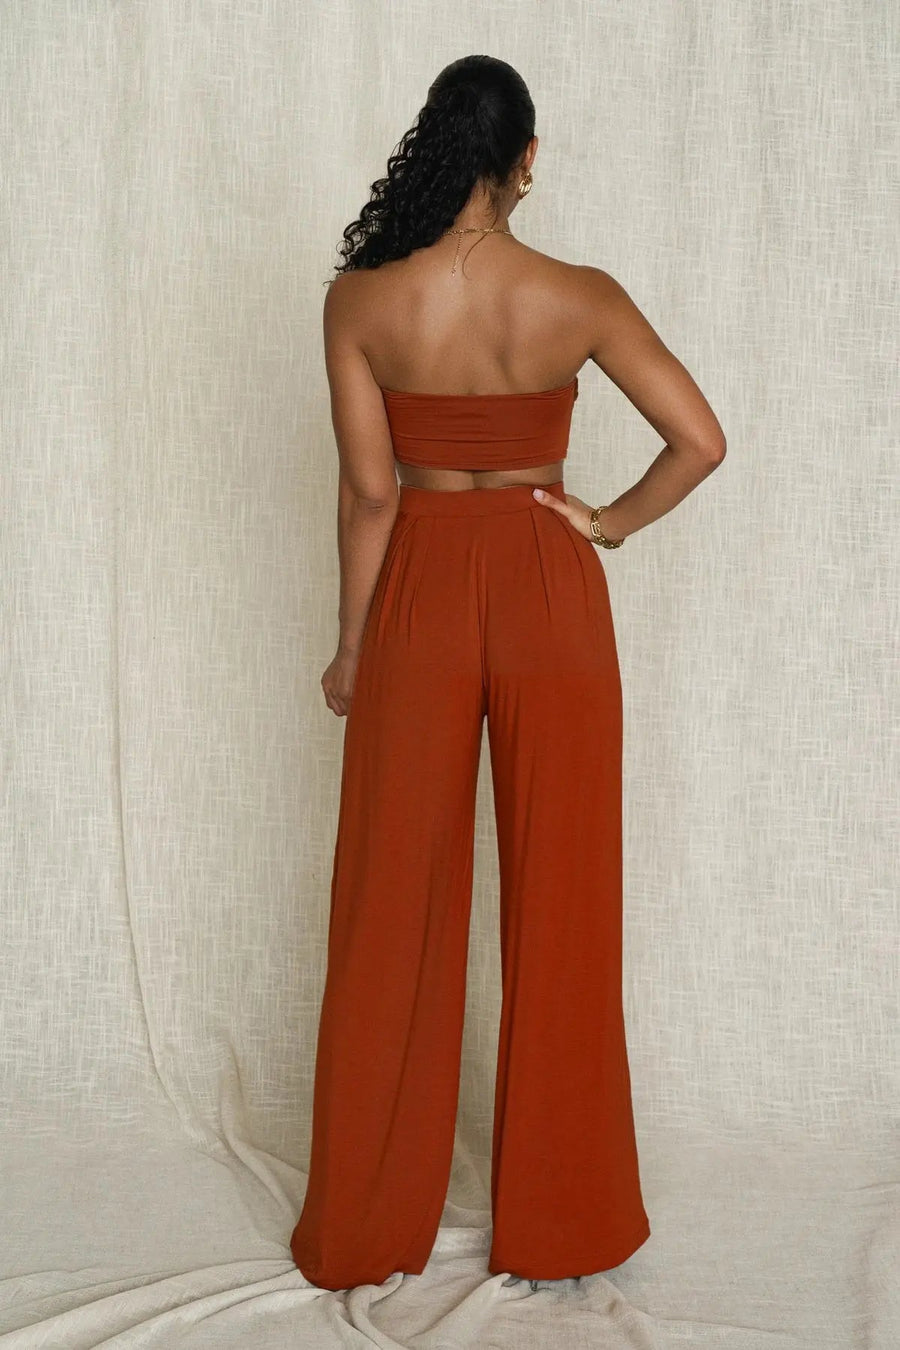 Women's Two Piece Knot Front Bandeau Crop Top And Wide Leg Pants Outfit